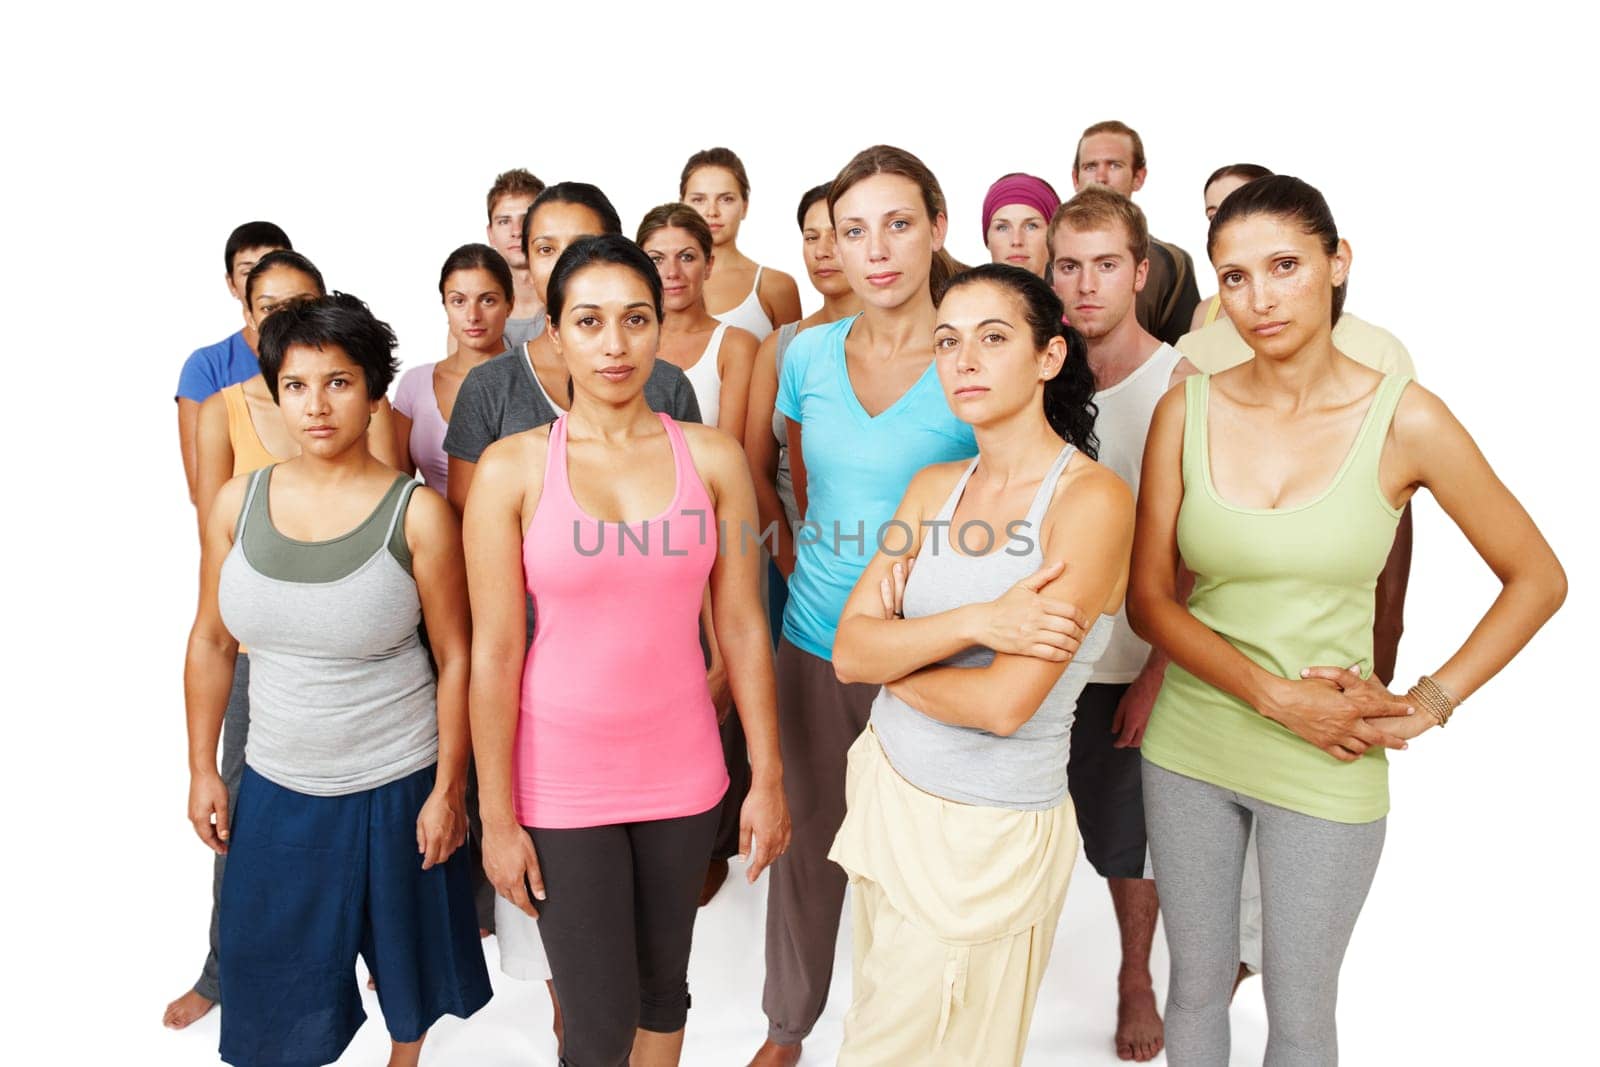 Theyre serious about yoga fitness. A serious and focused yoga class standing together on a white background